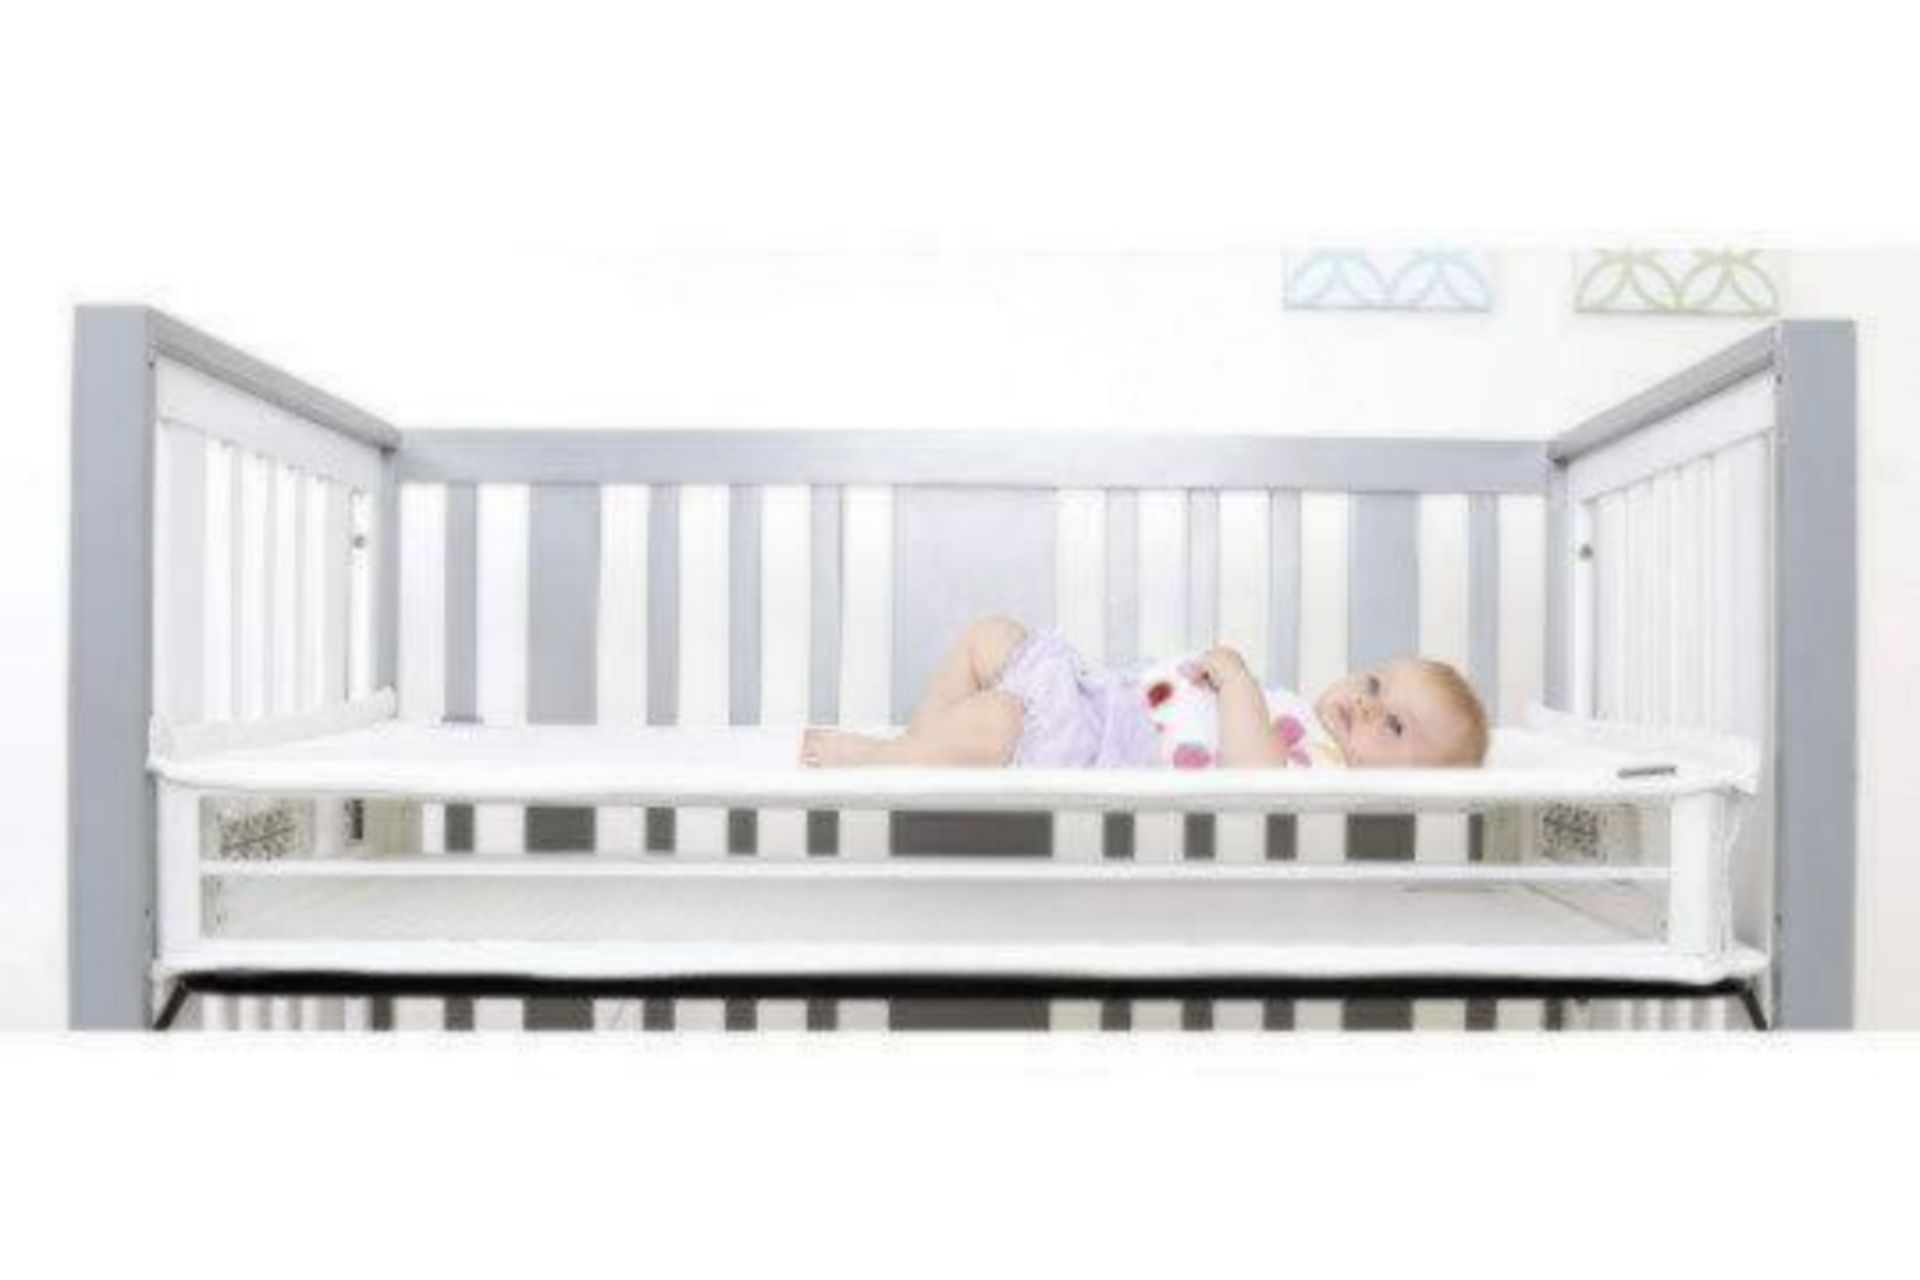 2 x Brand New Boxed - Baby Trend Respiro Cot Mattress Breathable mesh and Open Air Sides. RRP £169.